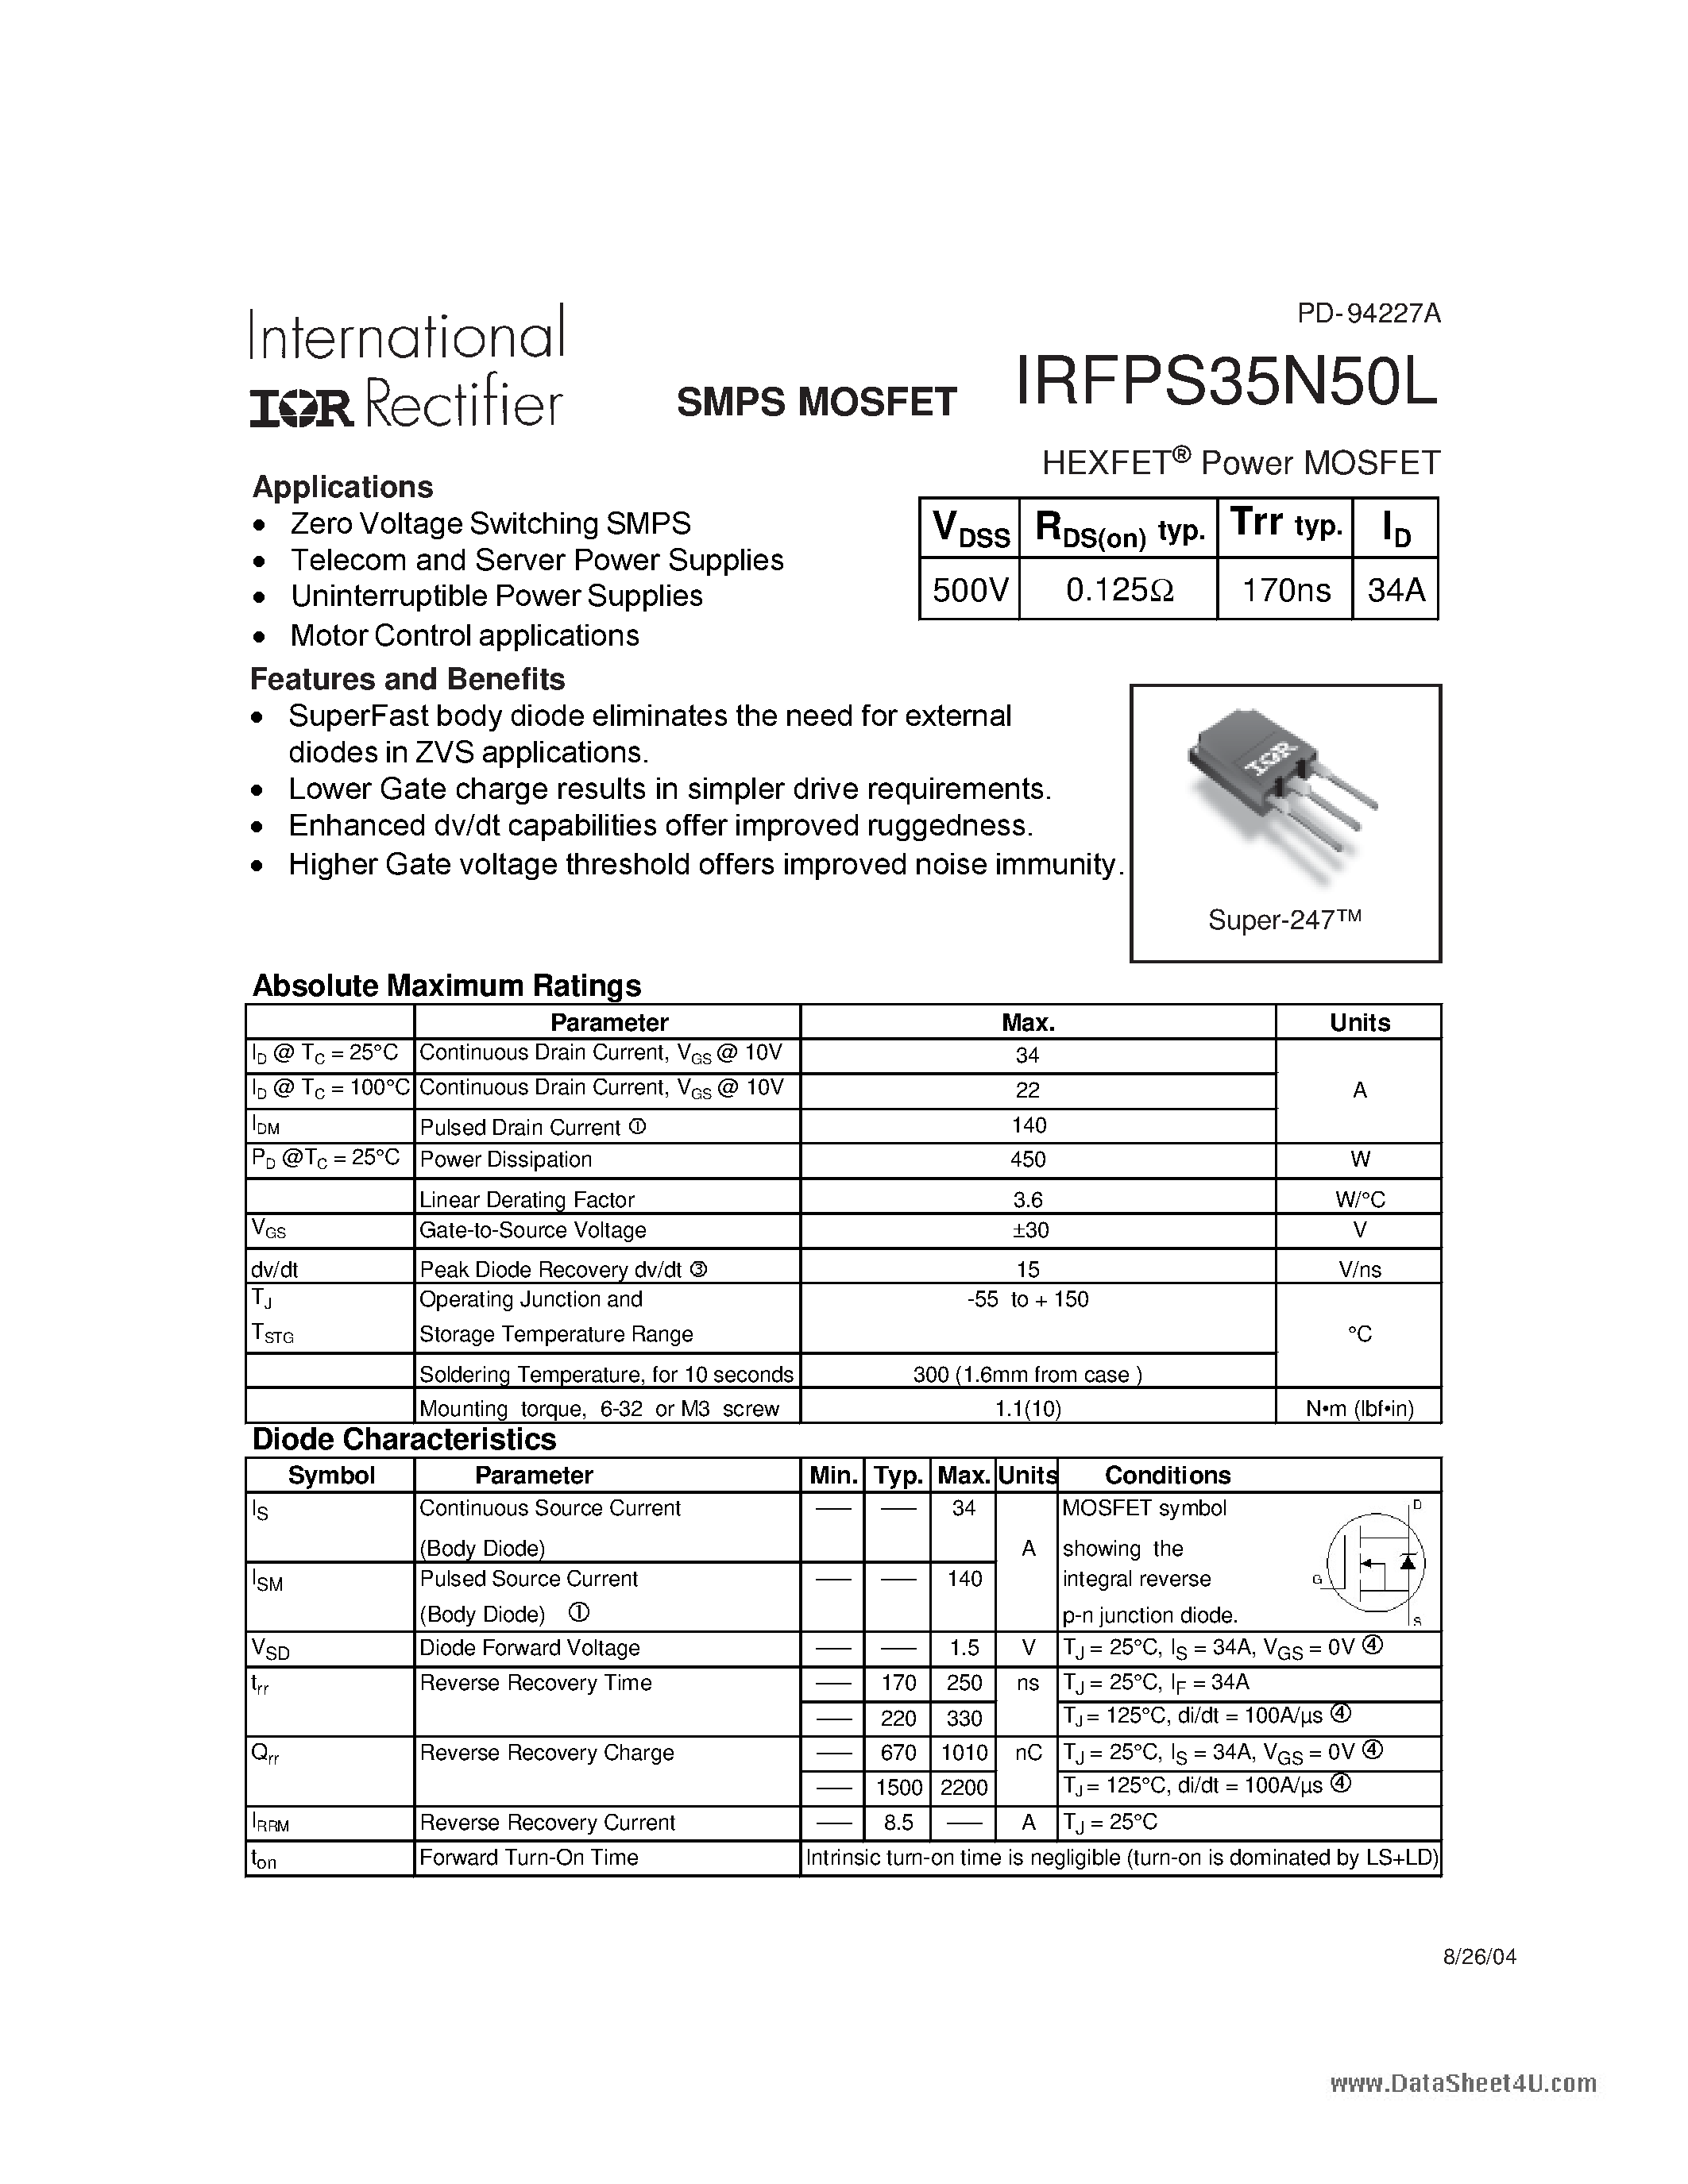 Даташит IRFPS35N50L - HEXFET Power MOSFET страница 1